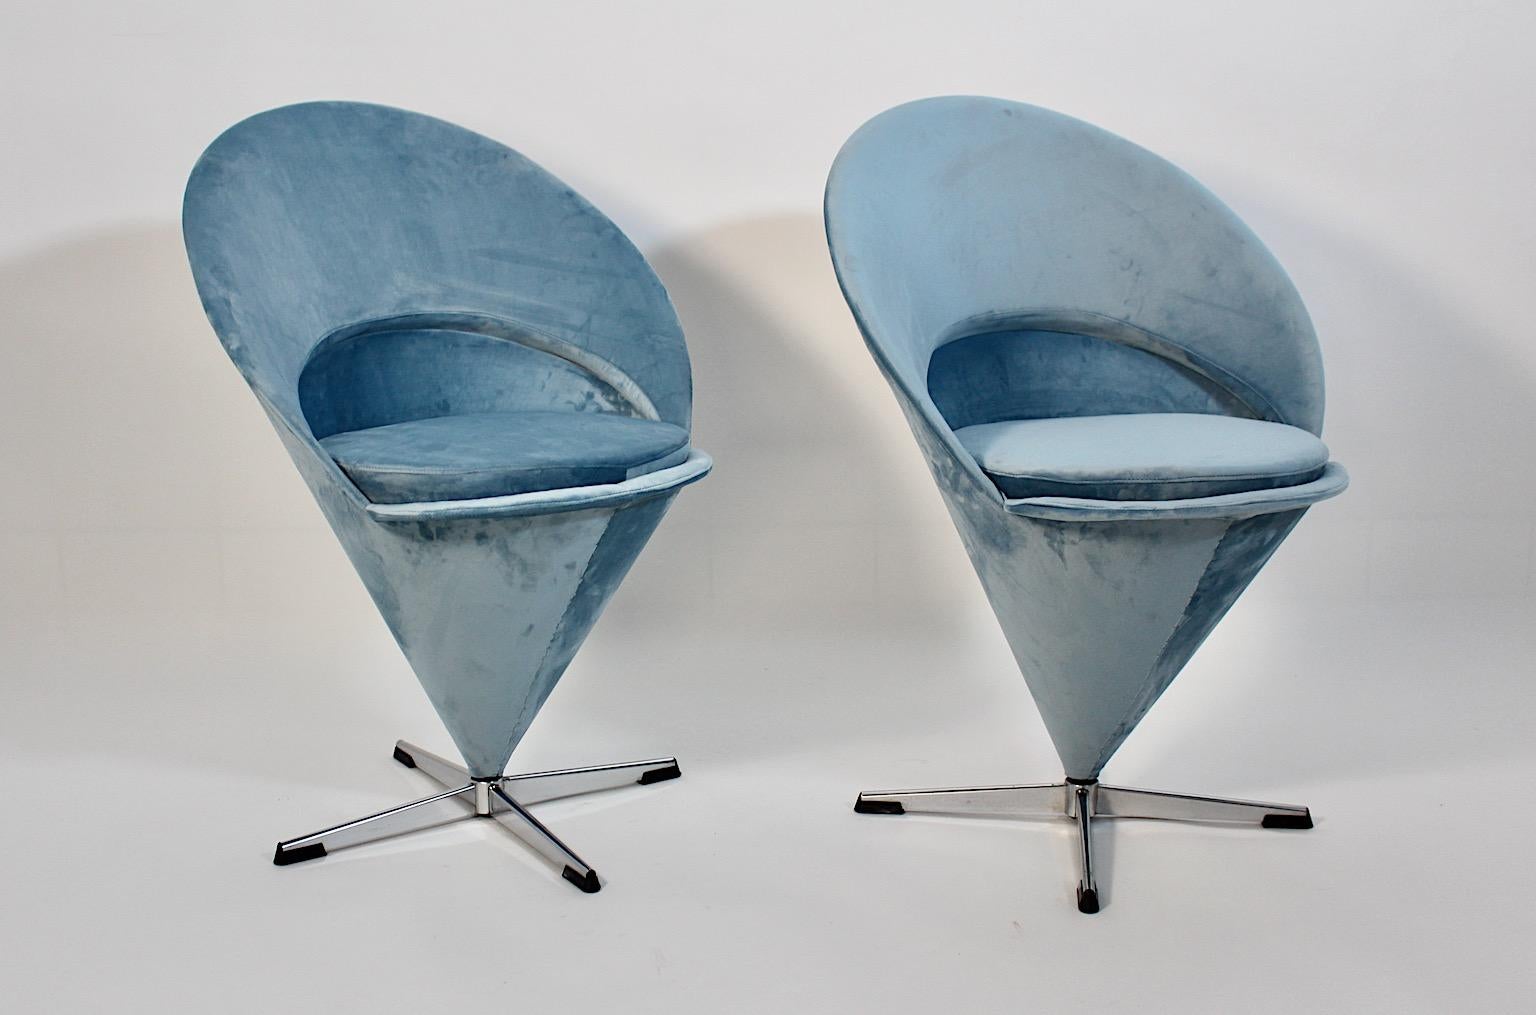 A stunning pair or duo swiveling side chairs model Cone designed by Verner Panton 1958, Denmark.
This pair of cone side chairs is newly covered with pastel blue velvet fabric and so the duo shows overall good condition with minor signs of age and